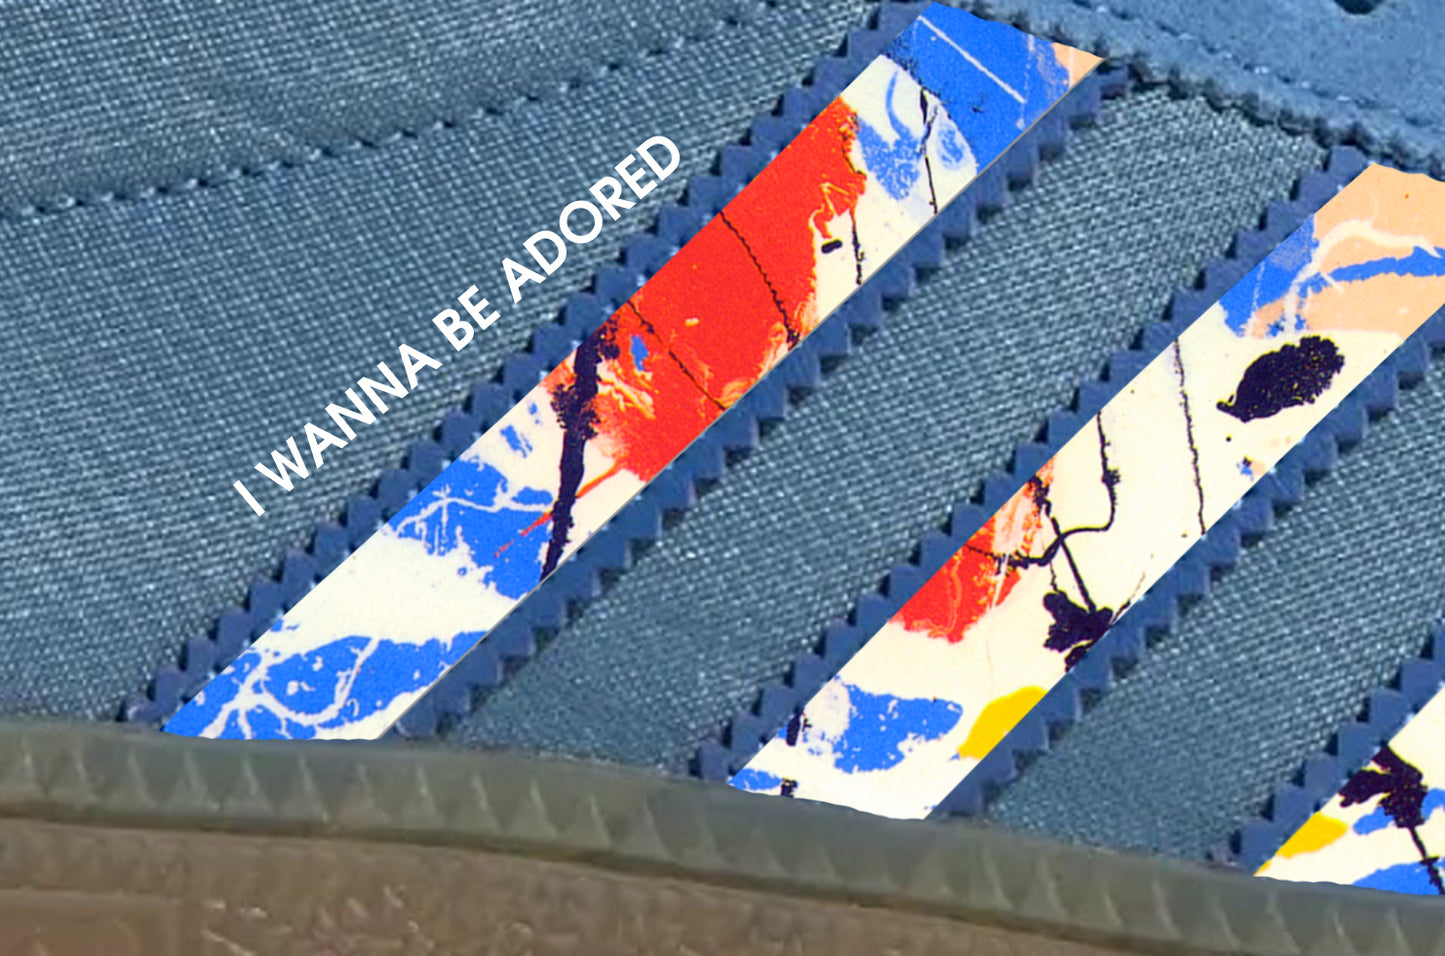 Limited edition The Stone Roses I wanna be adored custom adidas originals blue Handball spezial trainers / sneakers